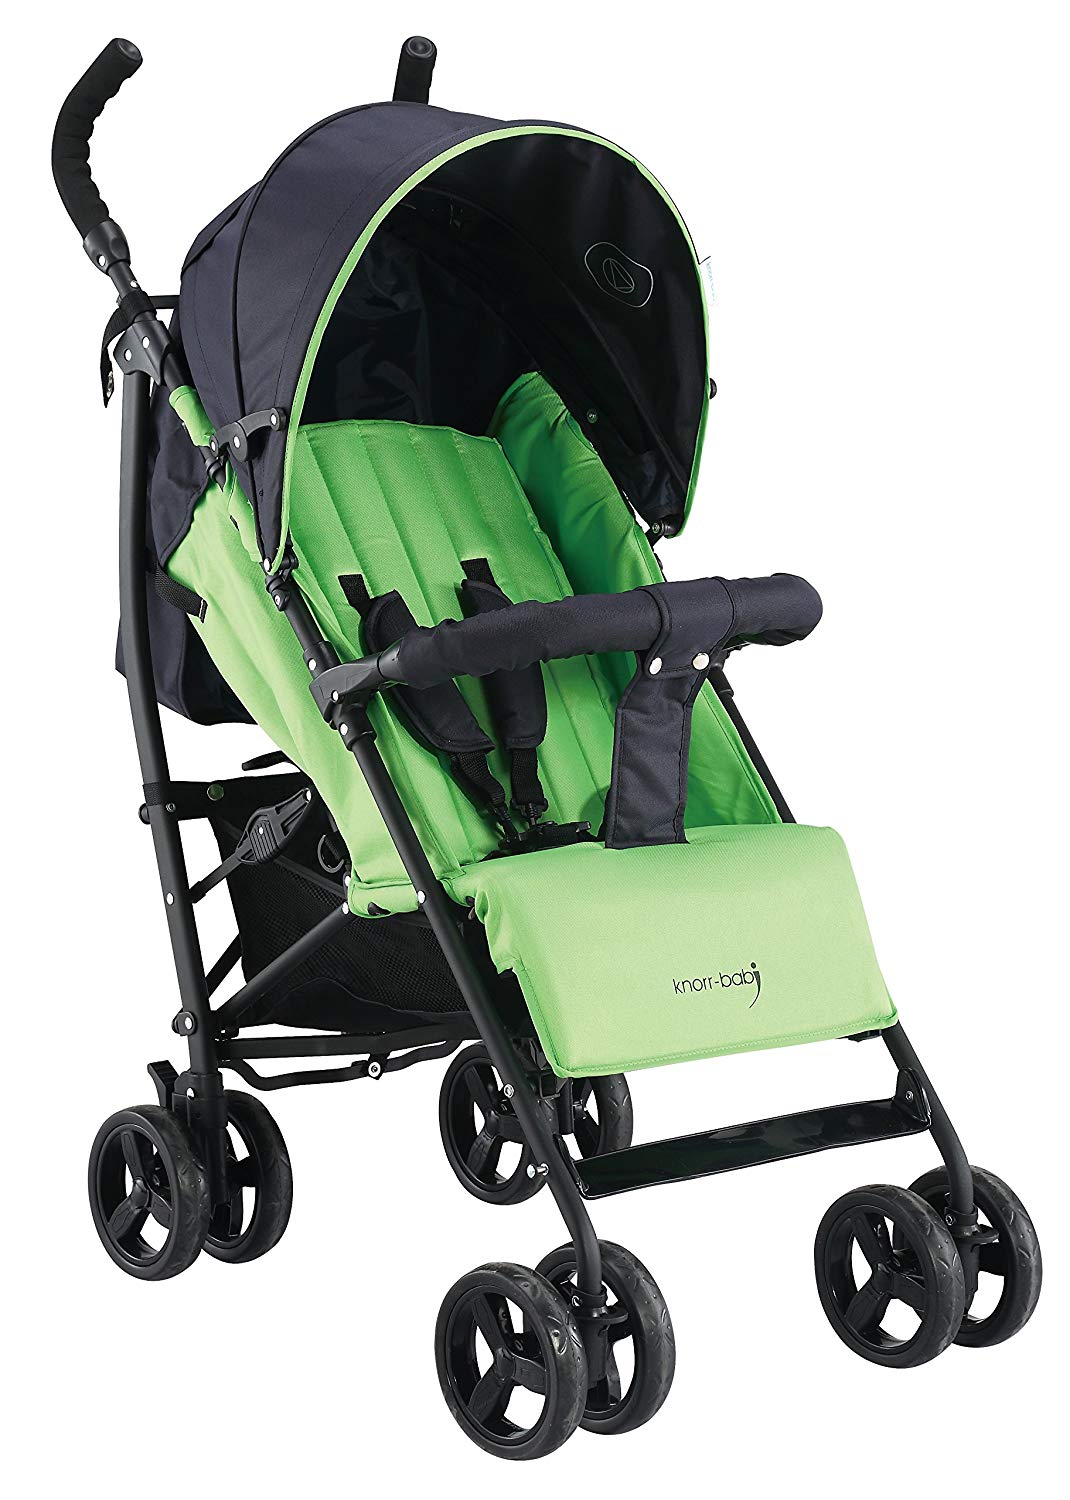 knorr-baby 848510 Buggy, Happy Colour Styler